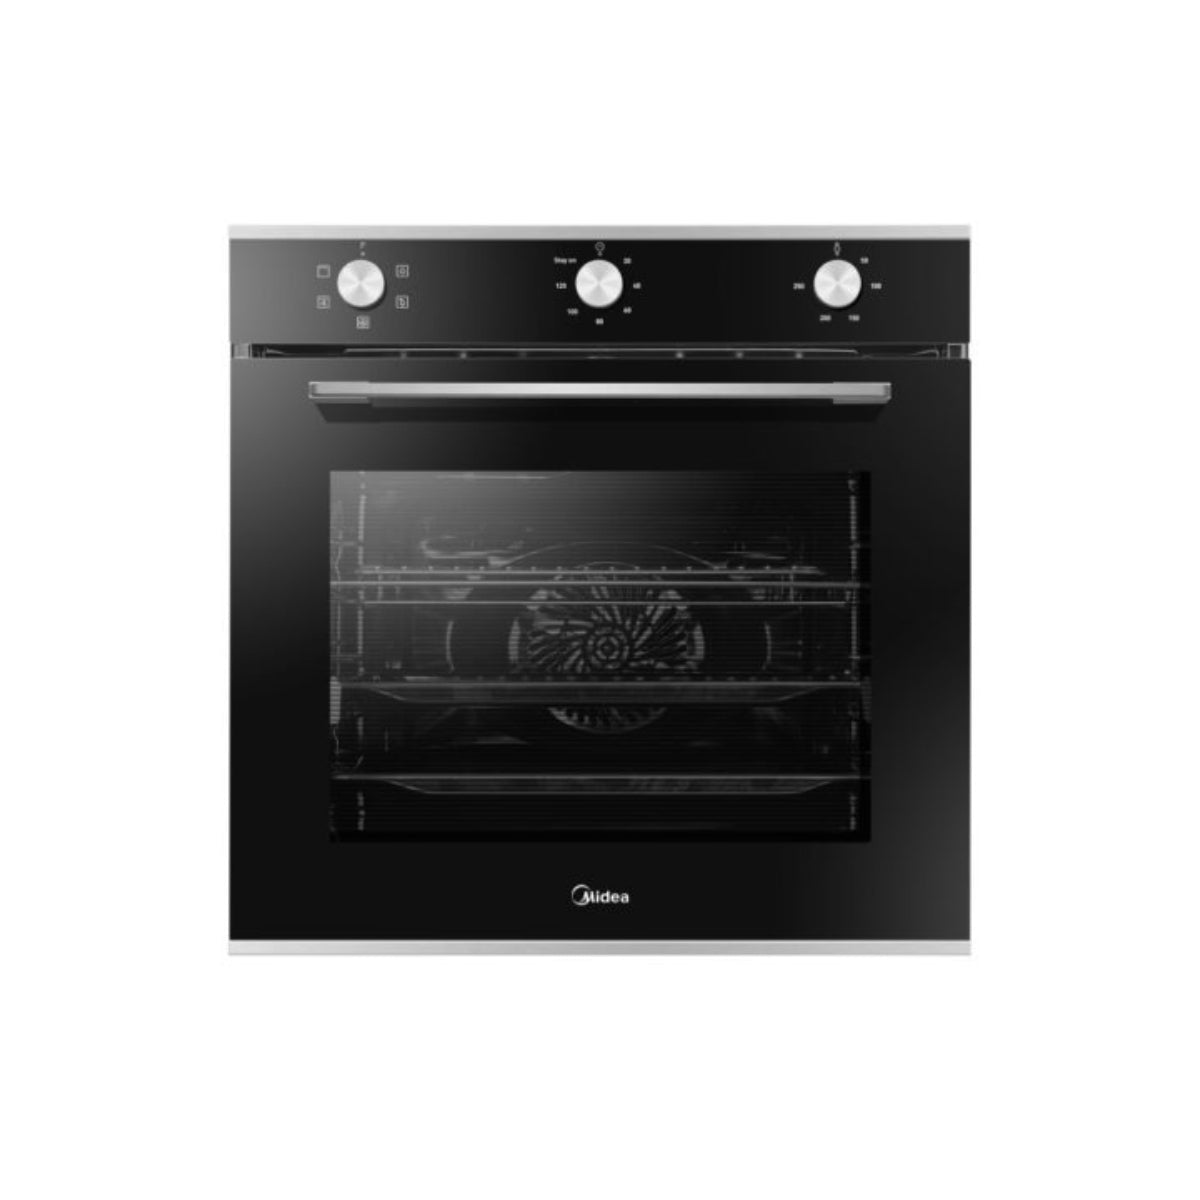 Midea Built-in Electric Wall Oven 5-Function